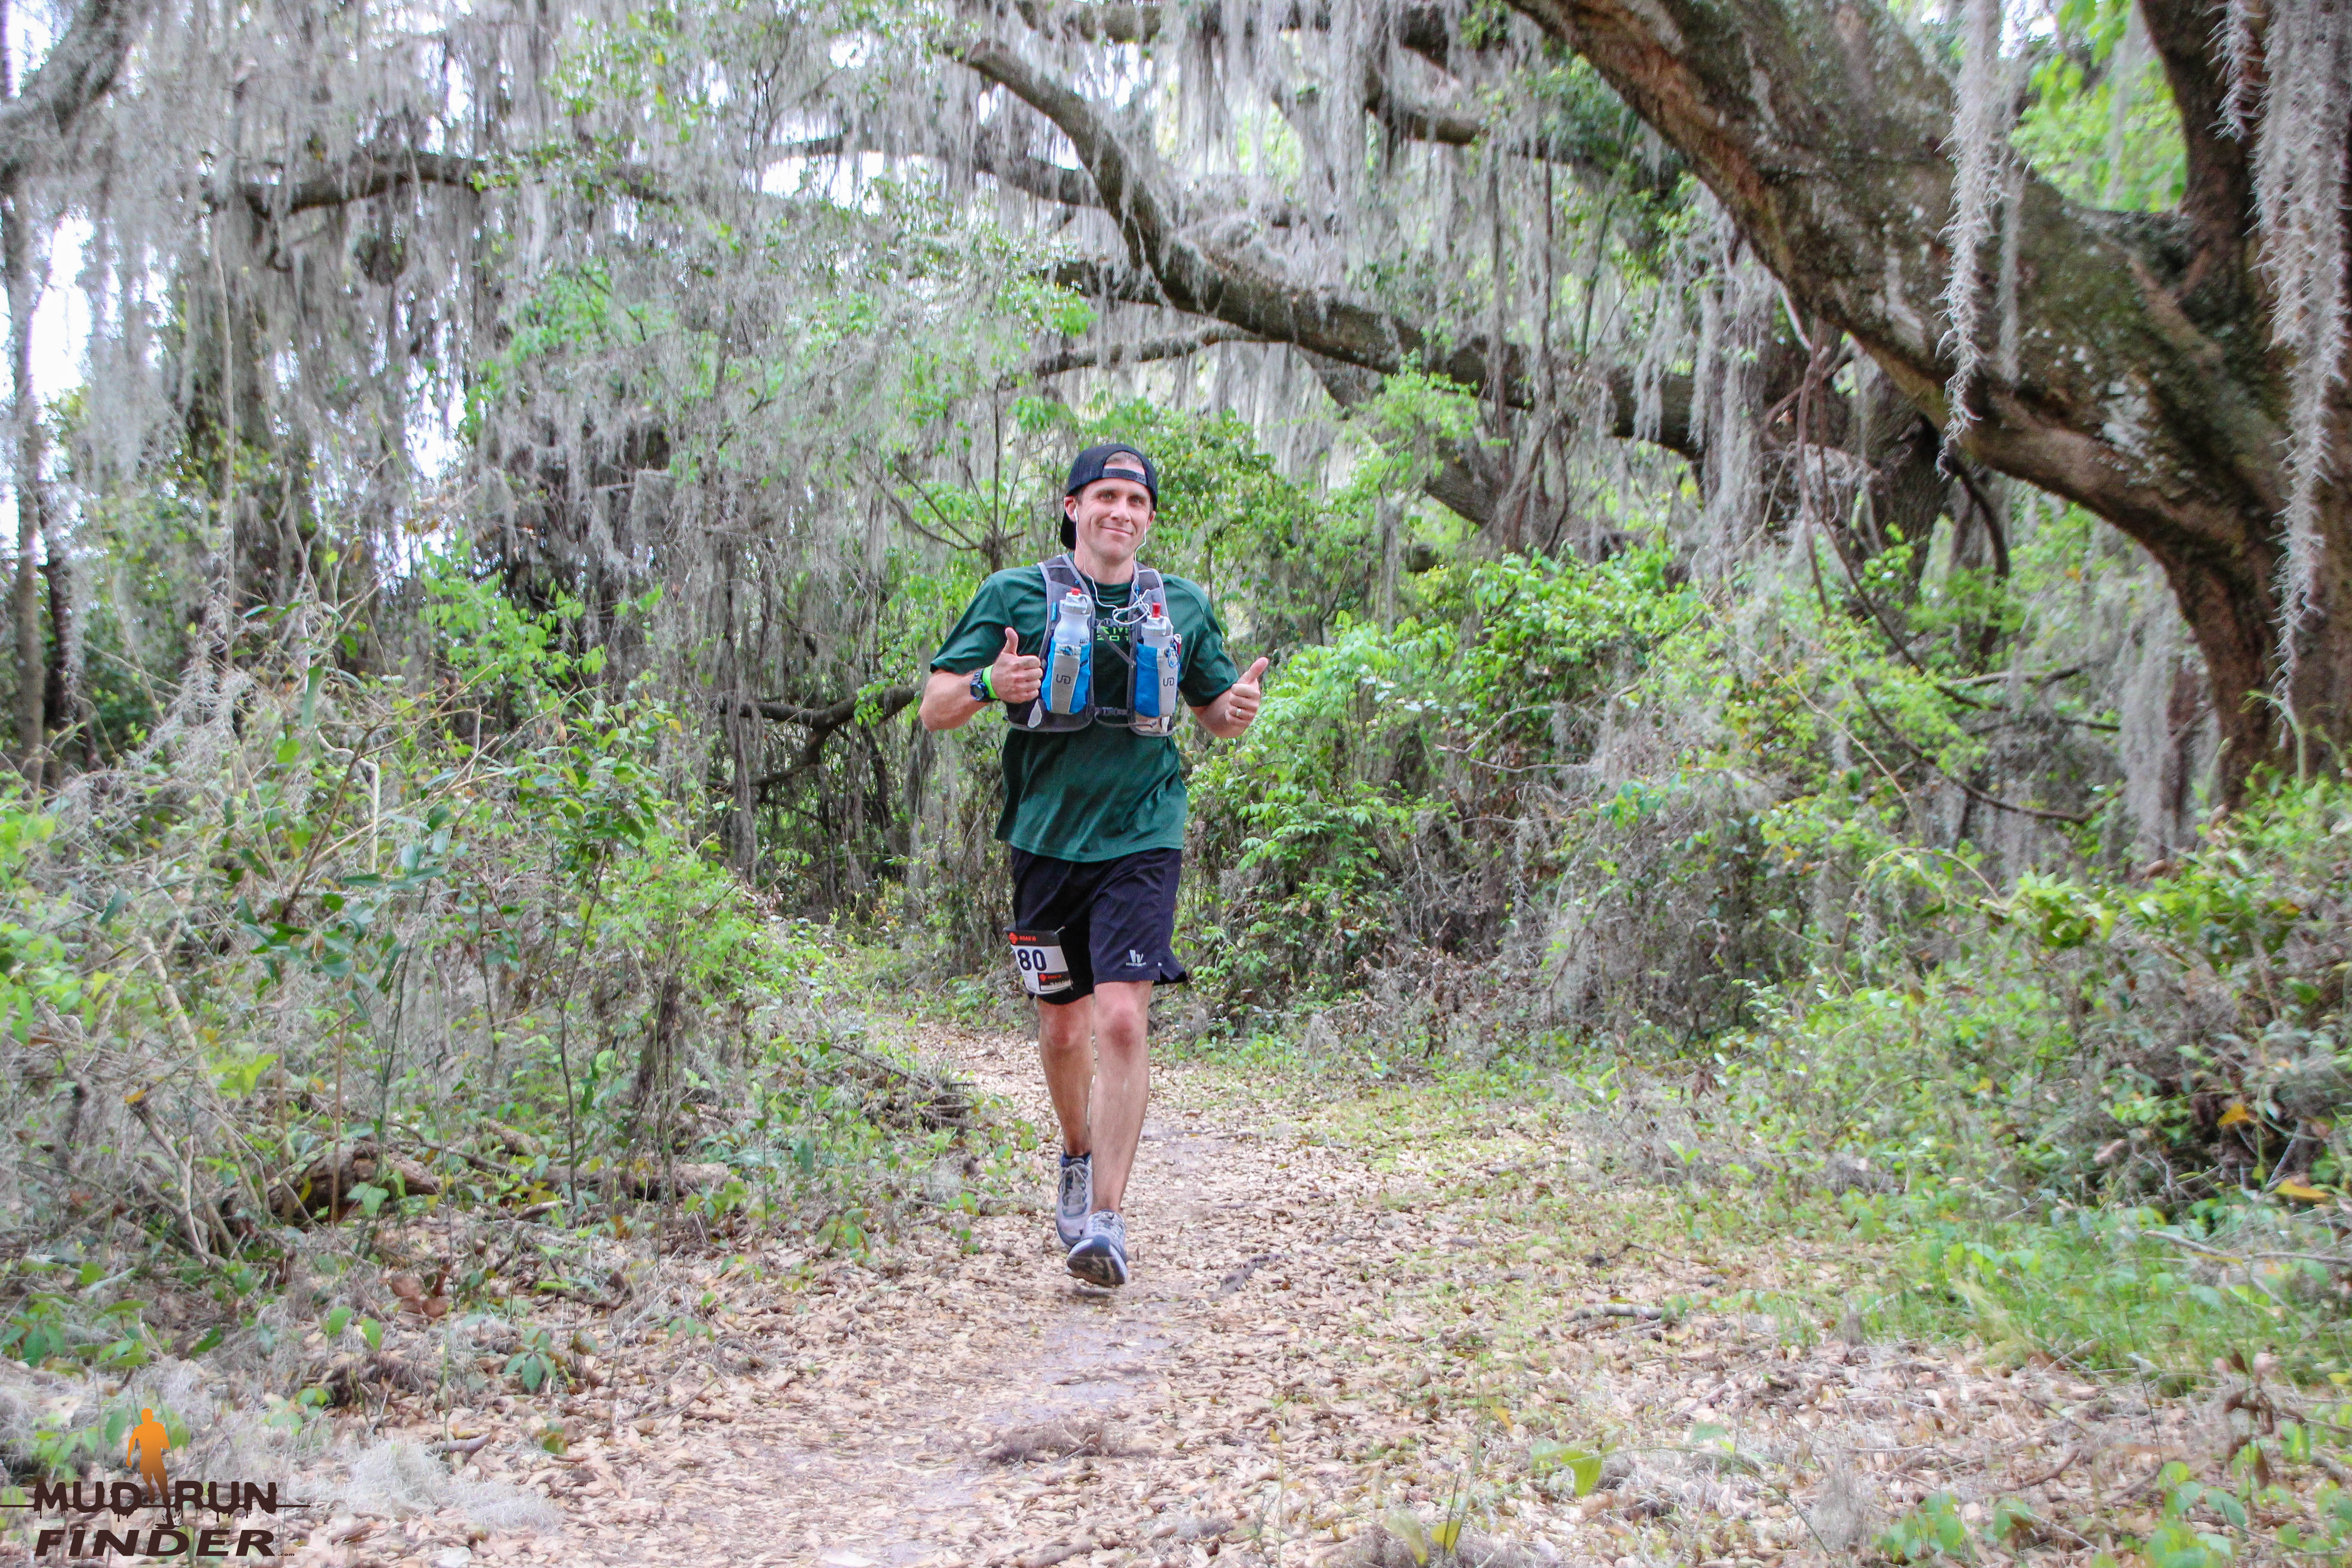 GroundHog Events presents Ares’ Vengeance Trail Race - March 10th, 2018 in Alachua, FL | Photo Credit: Mud Run Finder